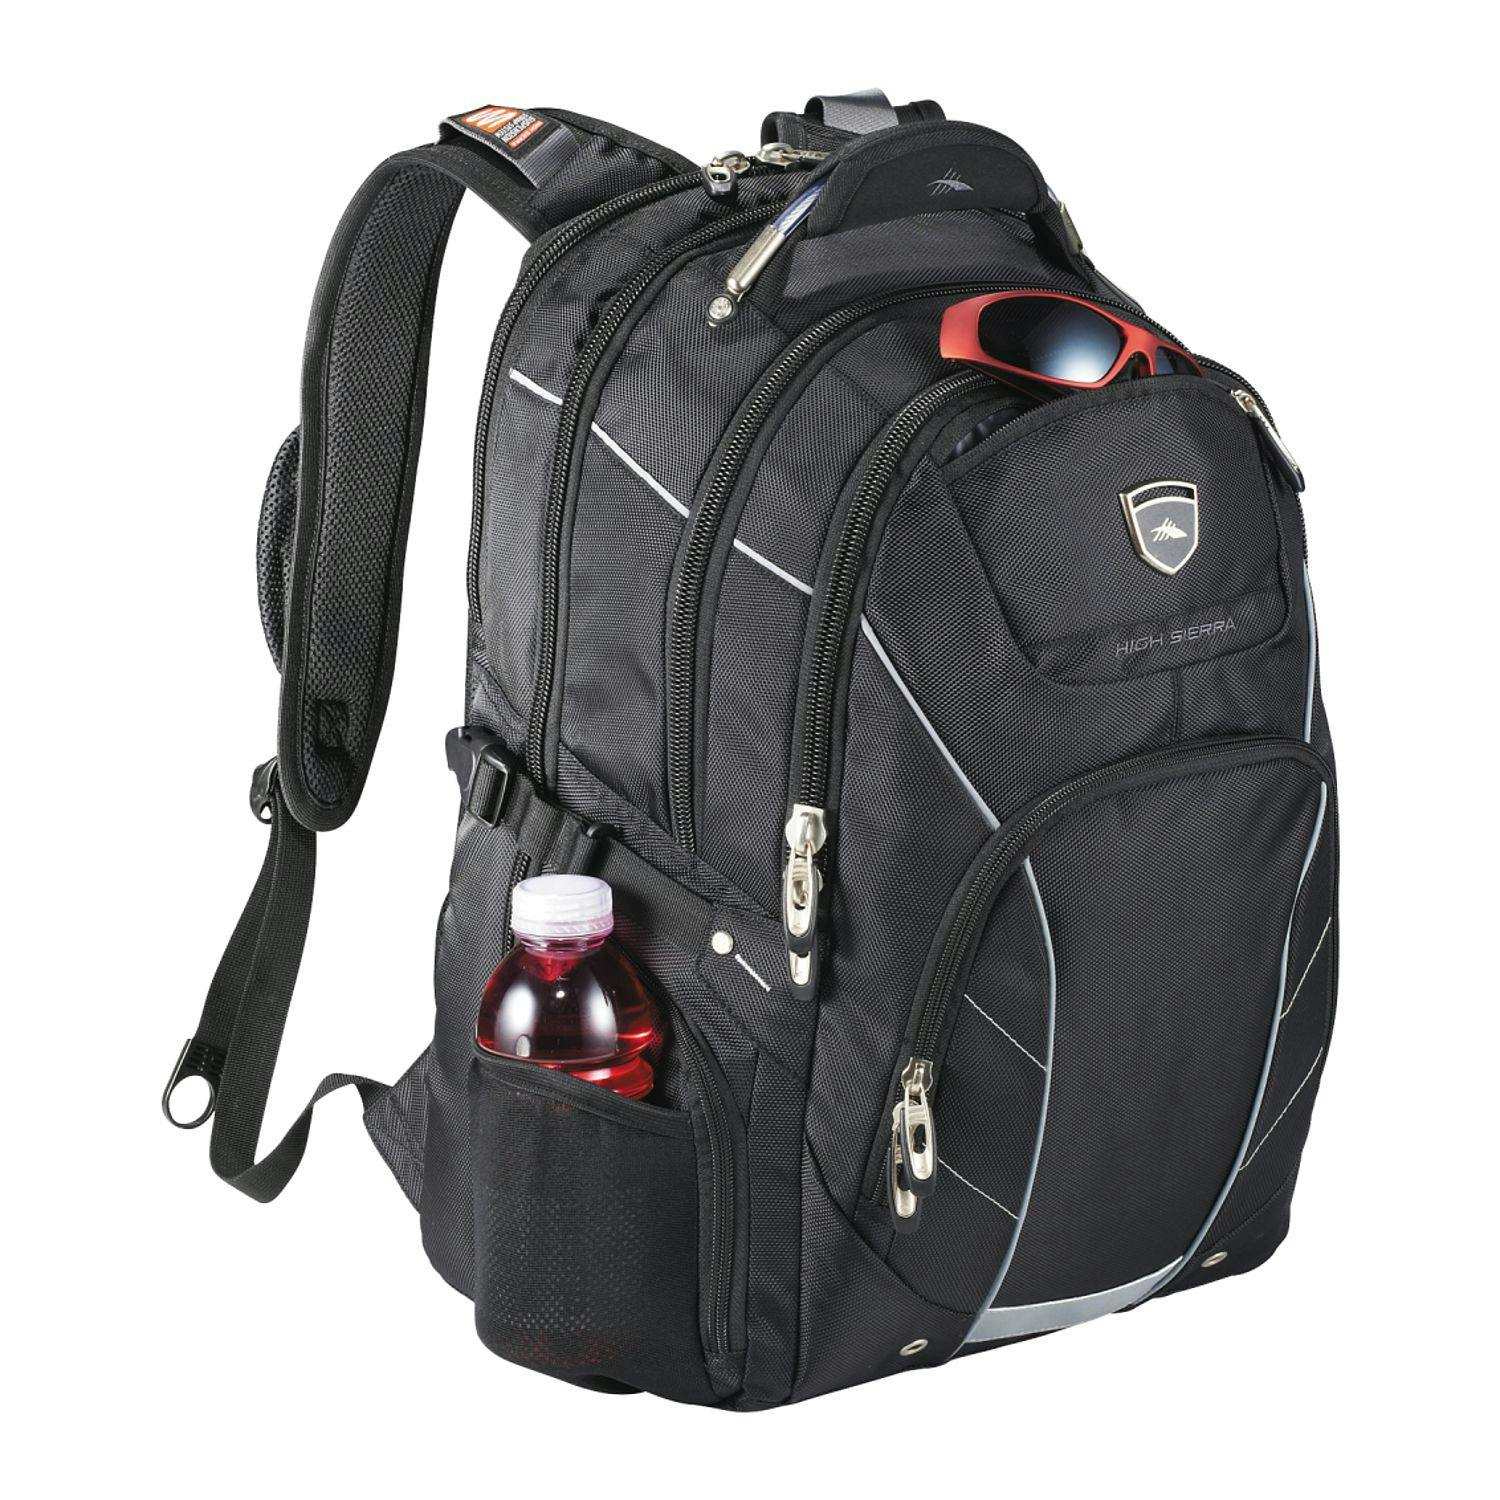 High Sierra Elite Fly-By 17" Computer Backpack - additional Image 2